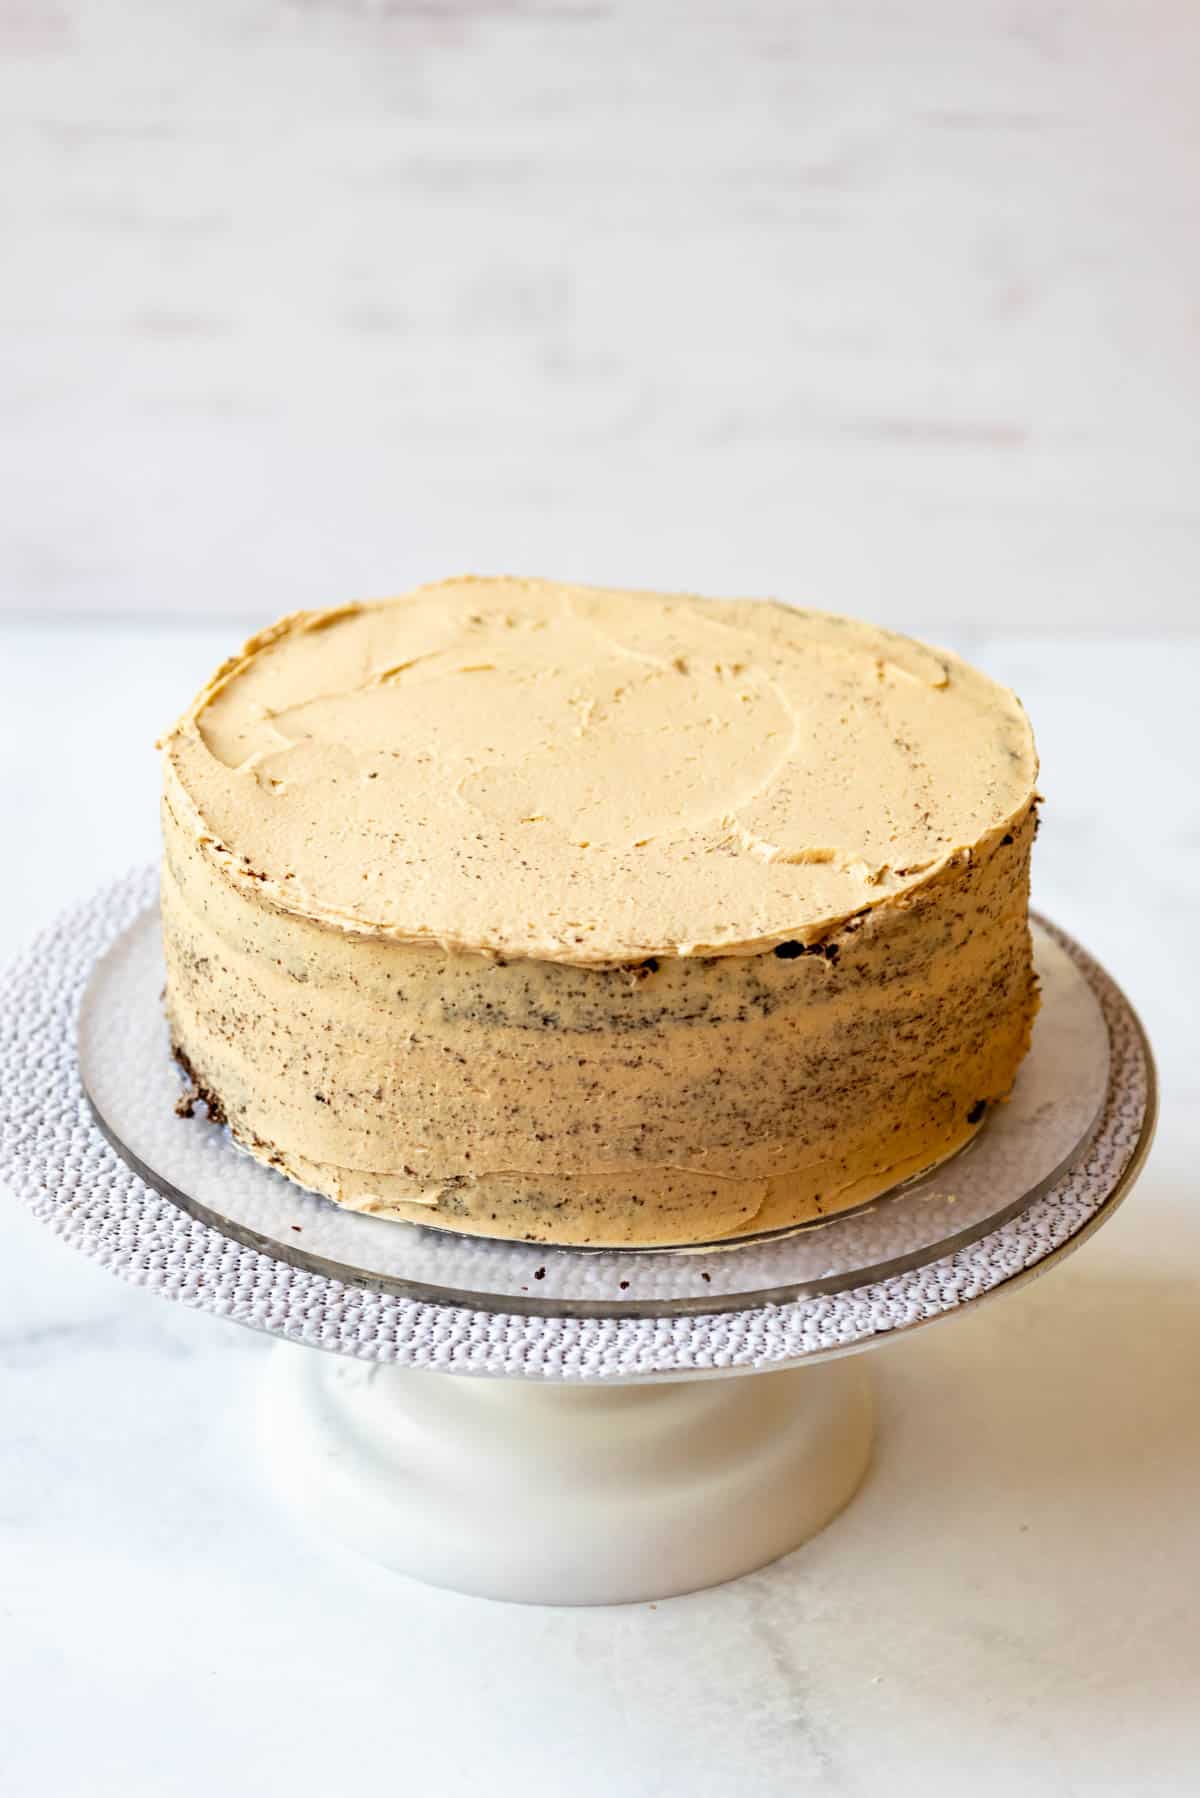 A chocolate peanut butter cake covered with peanut butter frosting.